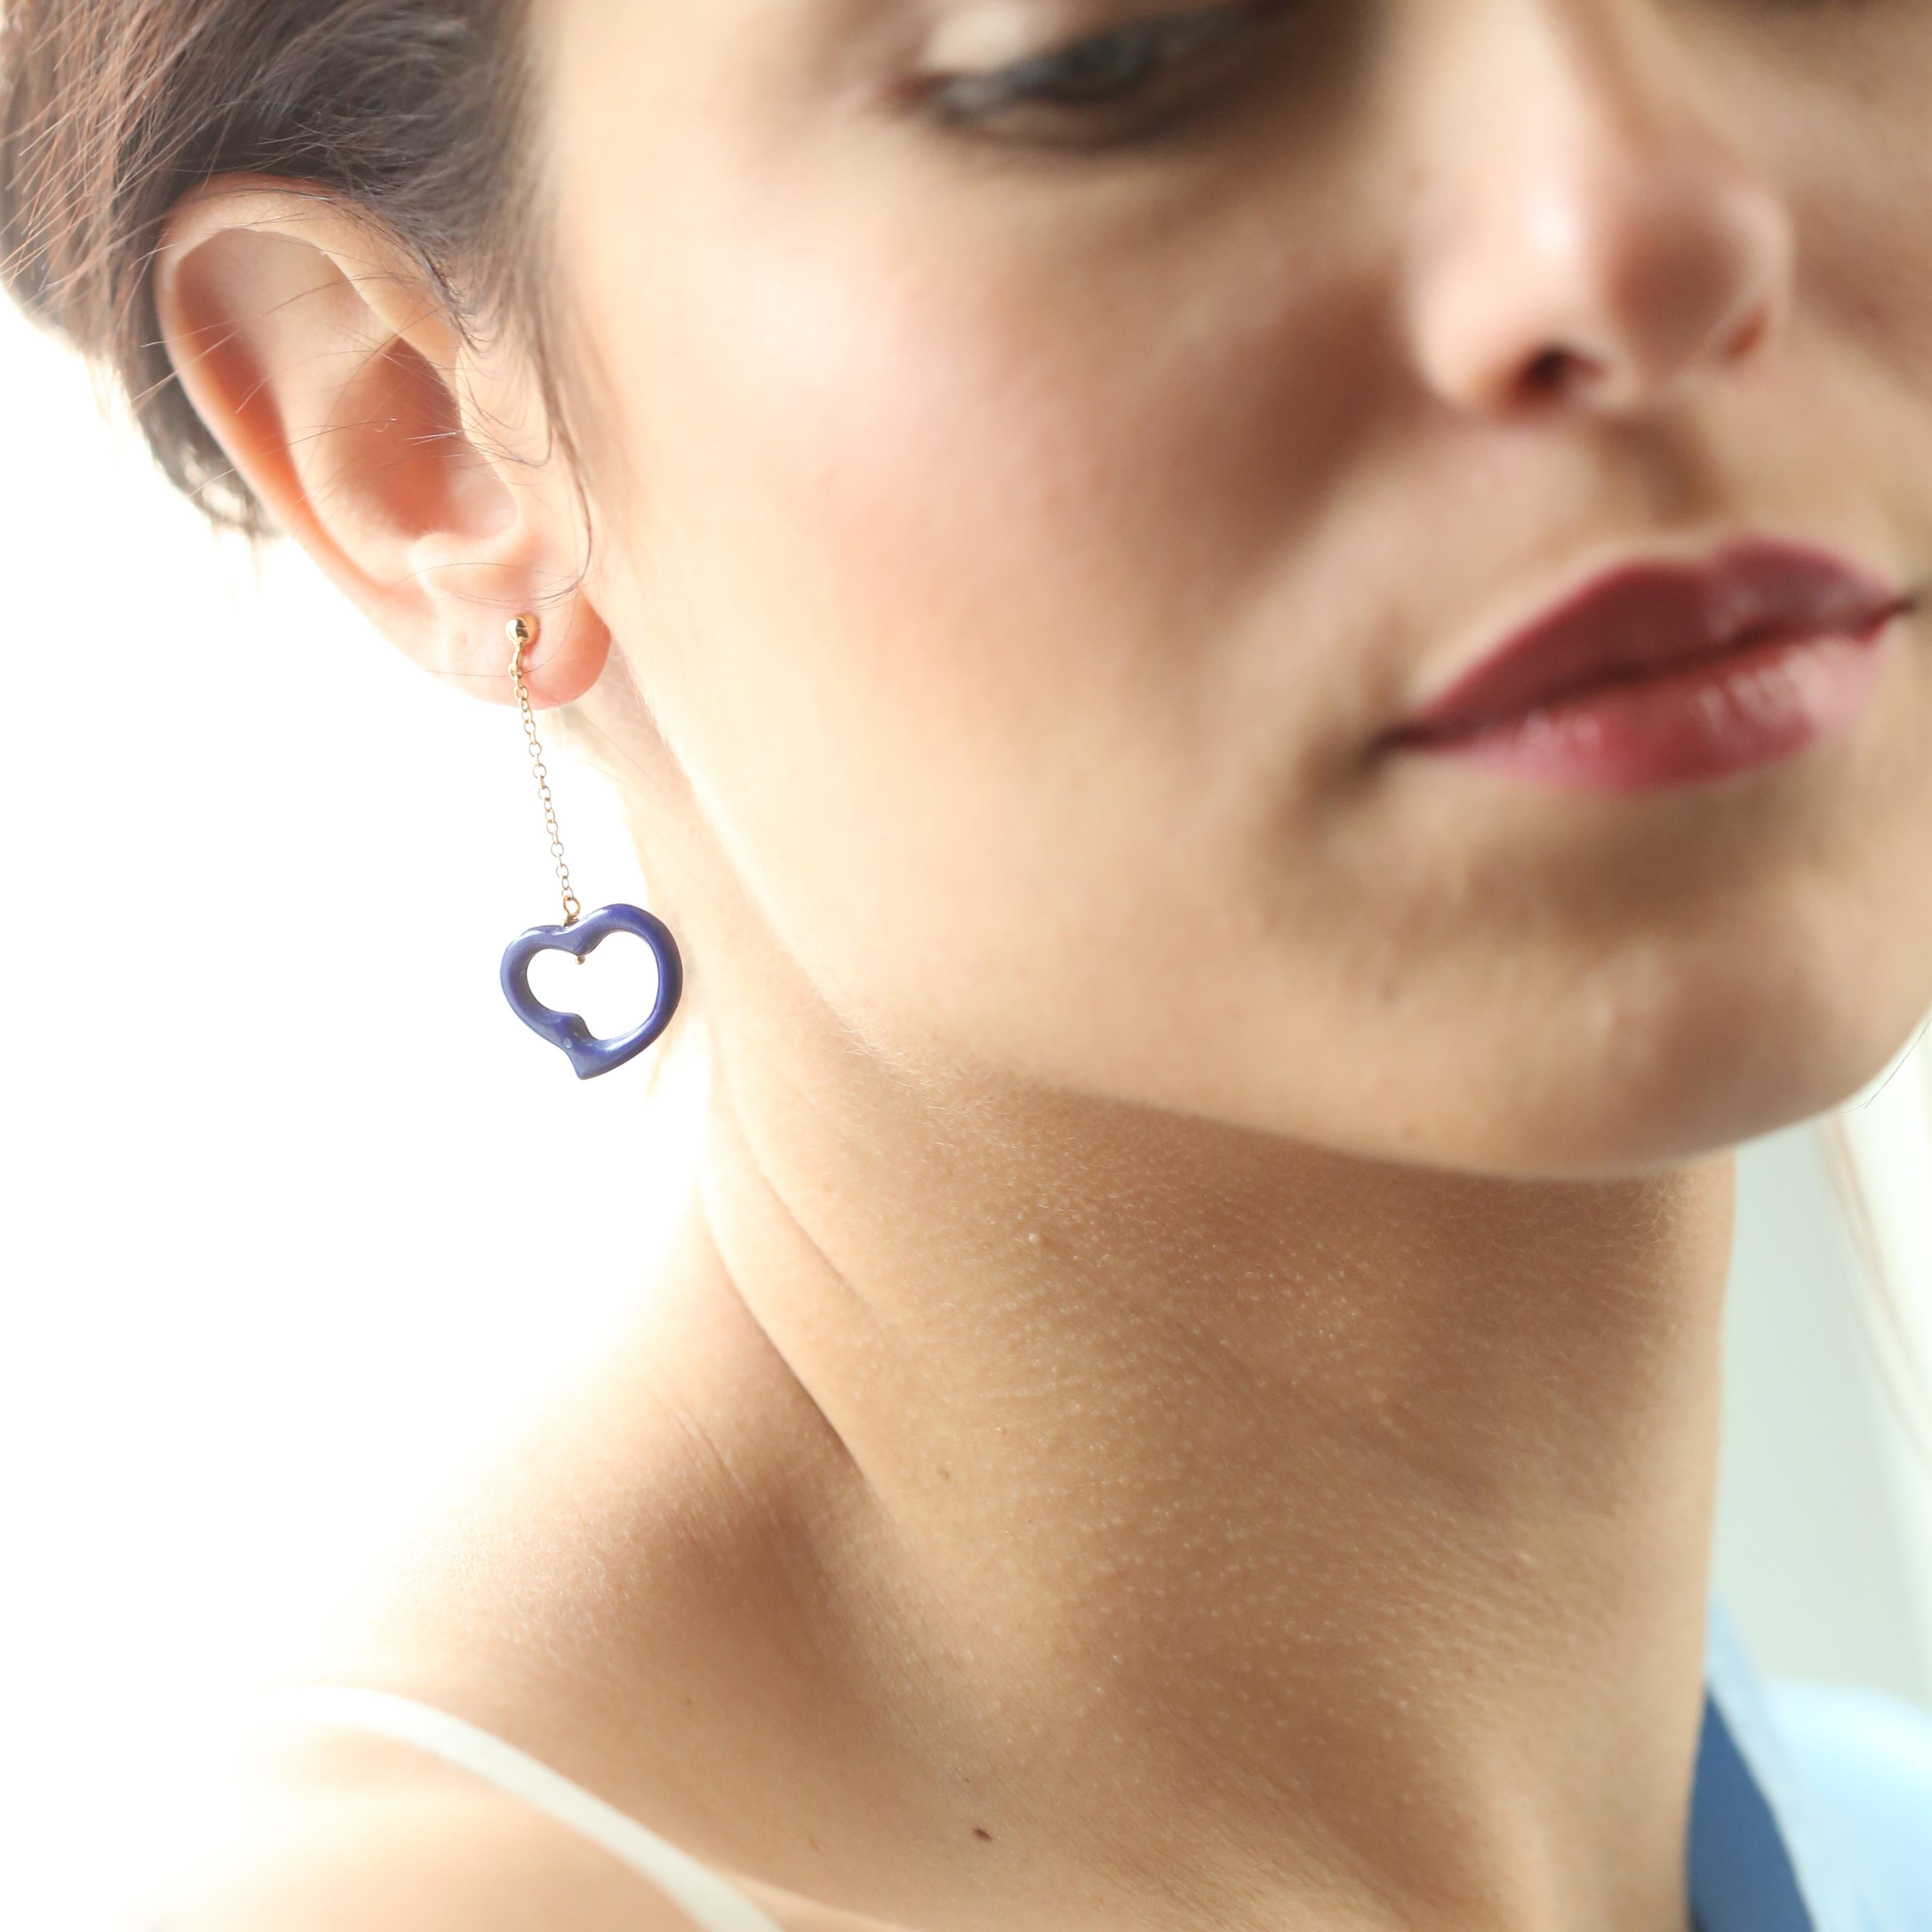 These breathtaking Intini Jewels Lapis Lazuli and drop earrings, have a sweet design and the most precious stones. Drop dangle earrings composed by a 18 karat yellow long delicate chain, inspired by the pure feeling of love and inner serenity. The